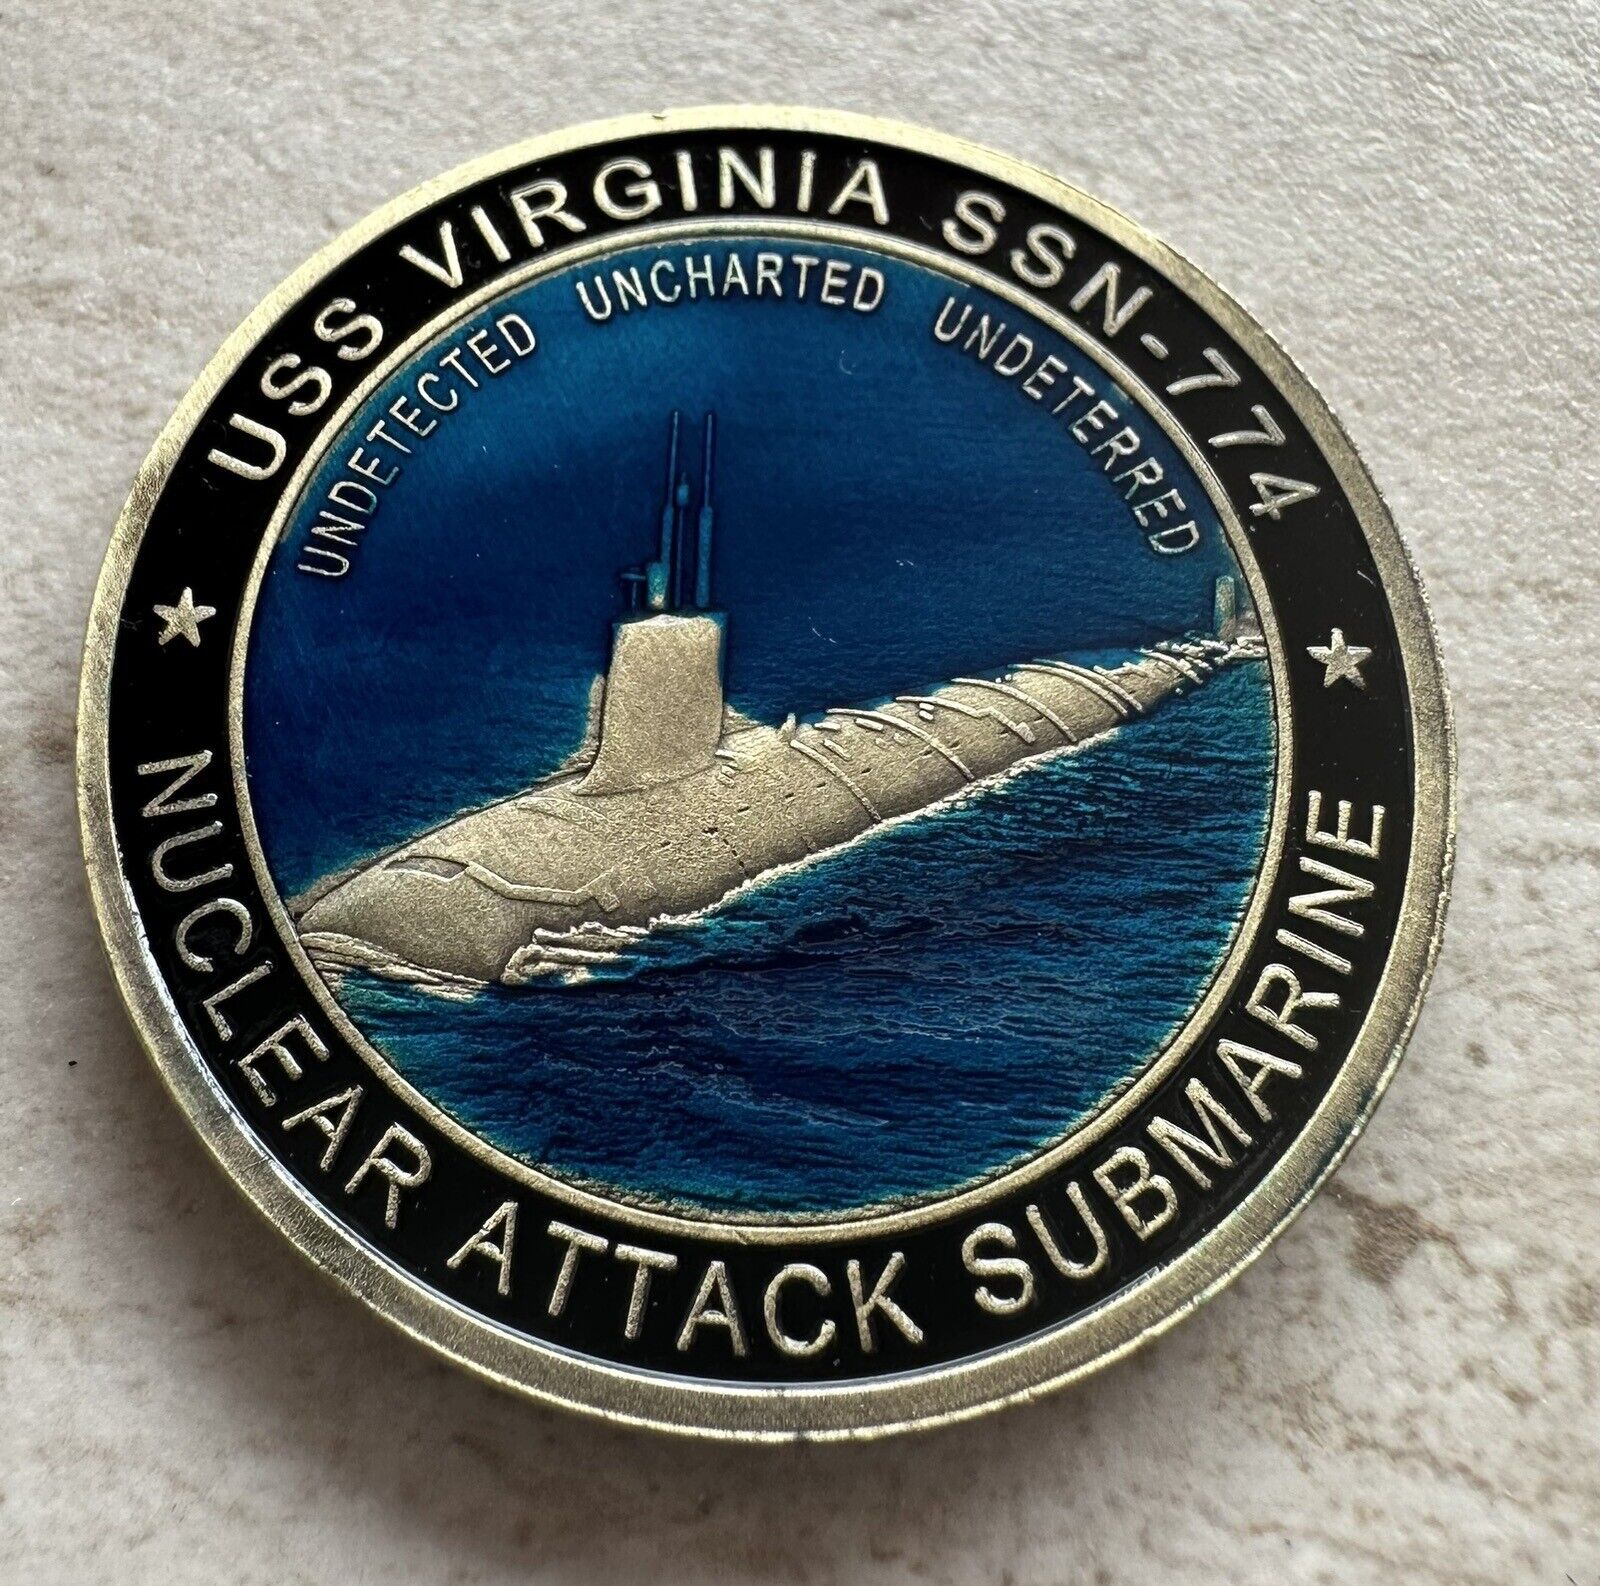 USN USS VIRGINIA SSN 774 NUCLEAR SUBMARINE Uncharted Undetected Undeterred